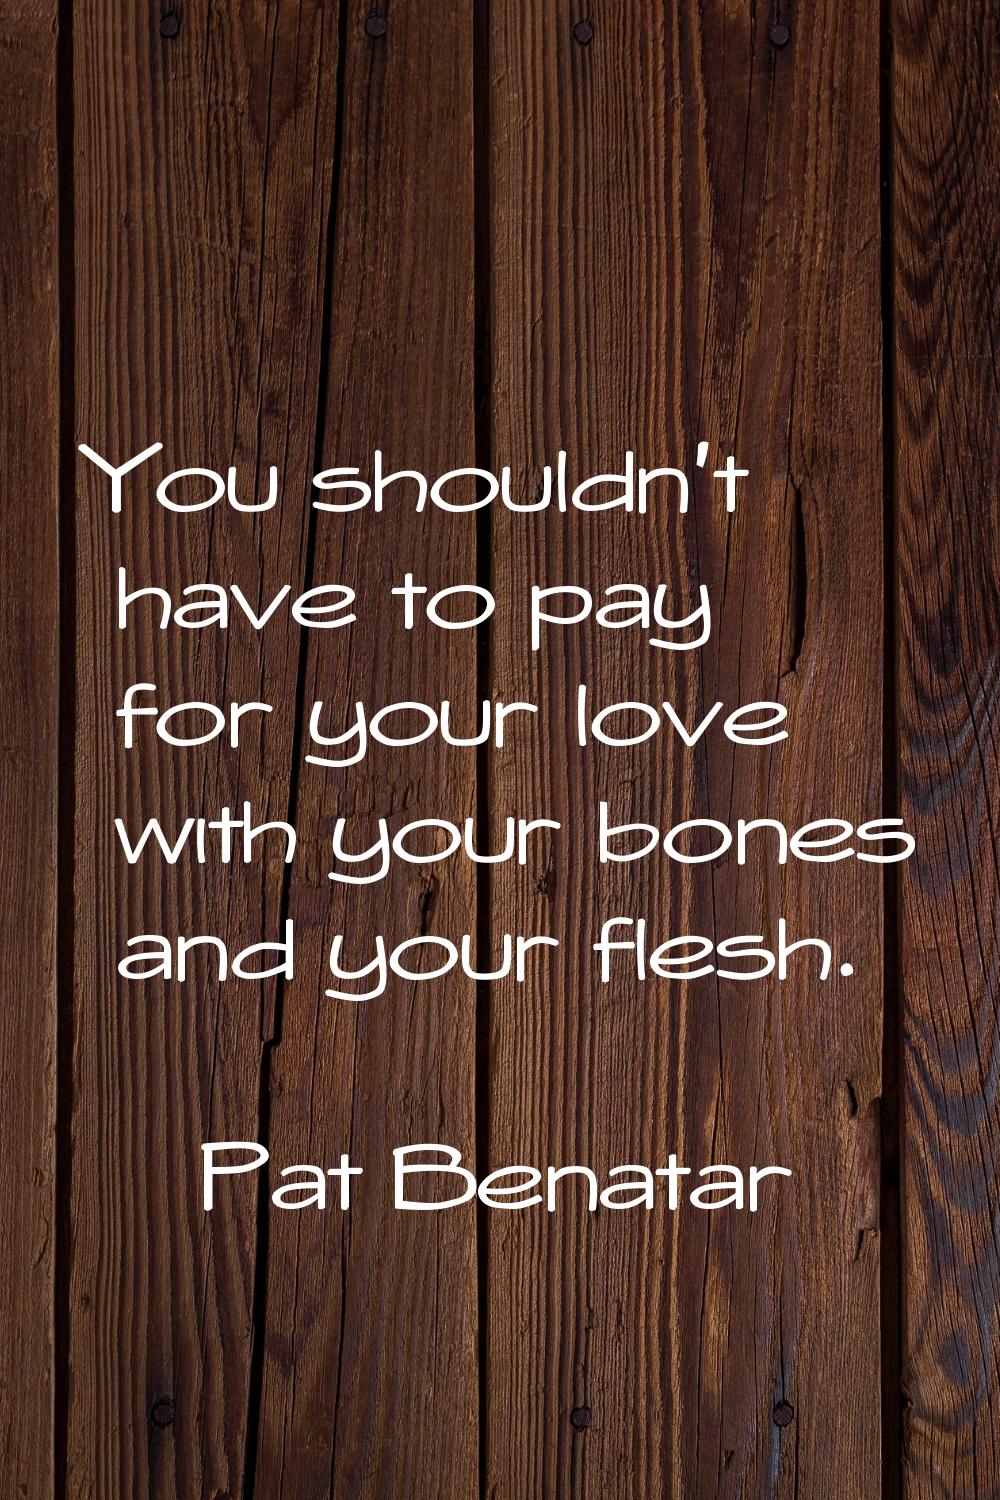 You shouldn't have to pay for your love with your bones and your flesh.